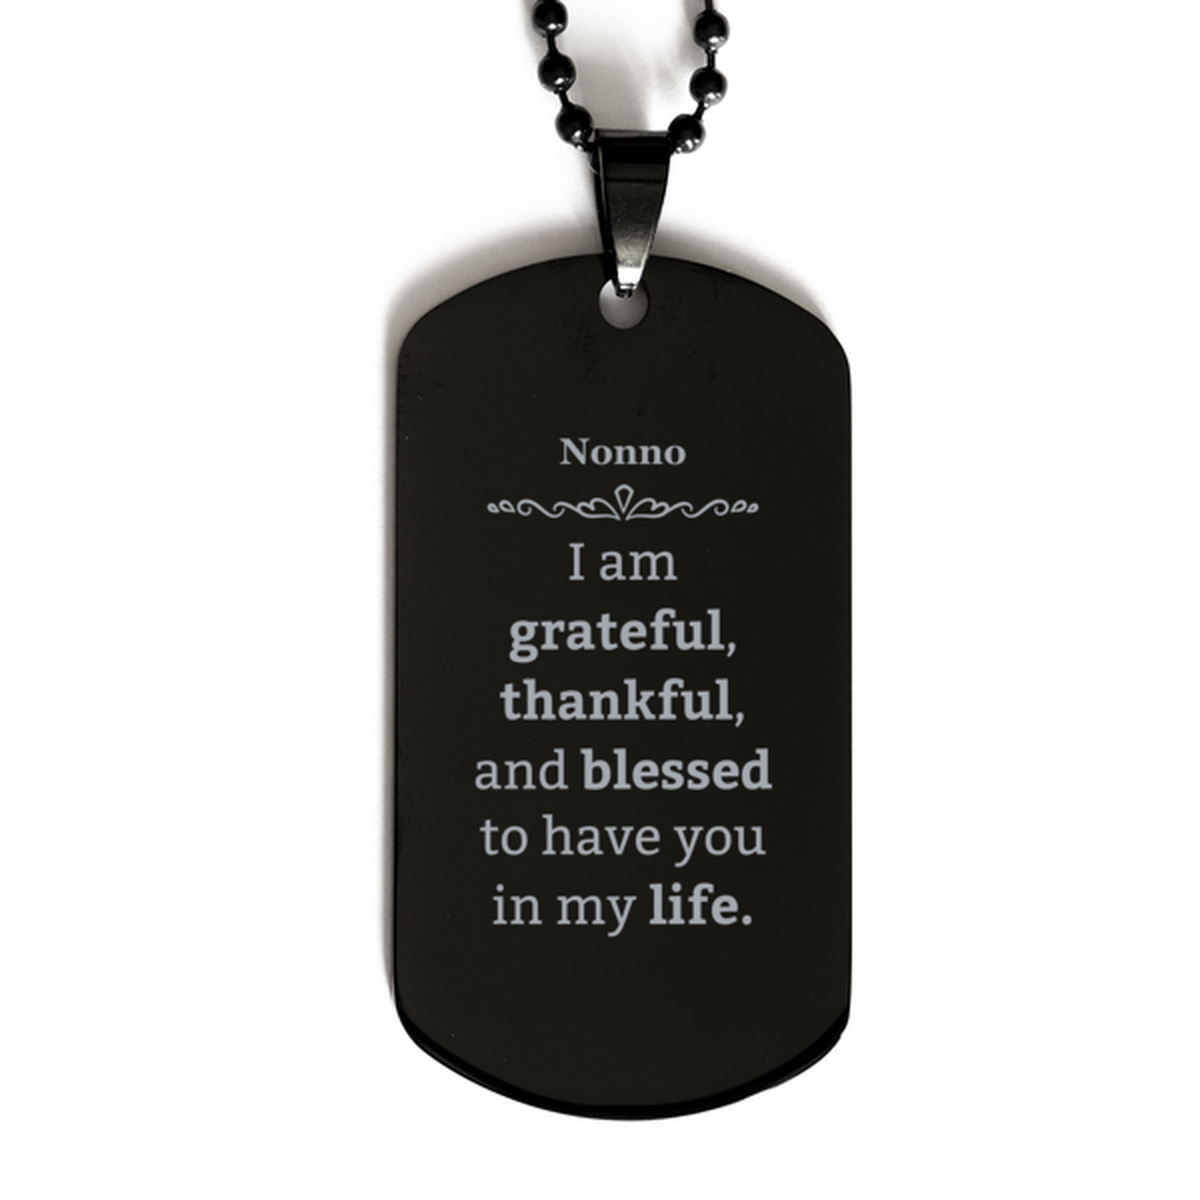 Nonno Appreciation Gifts, I am grateful, thankful, and blessed, Thank You Black Dog Tag for Nonno, Birthday Inspiration Gifts for Nonno